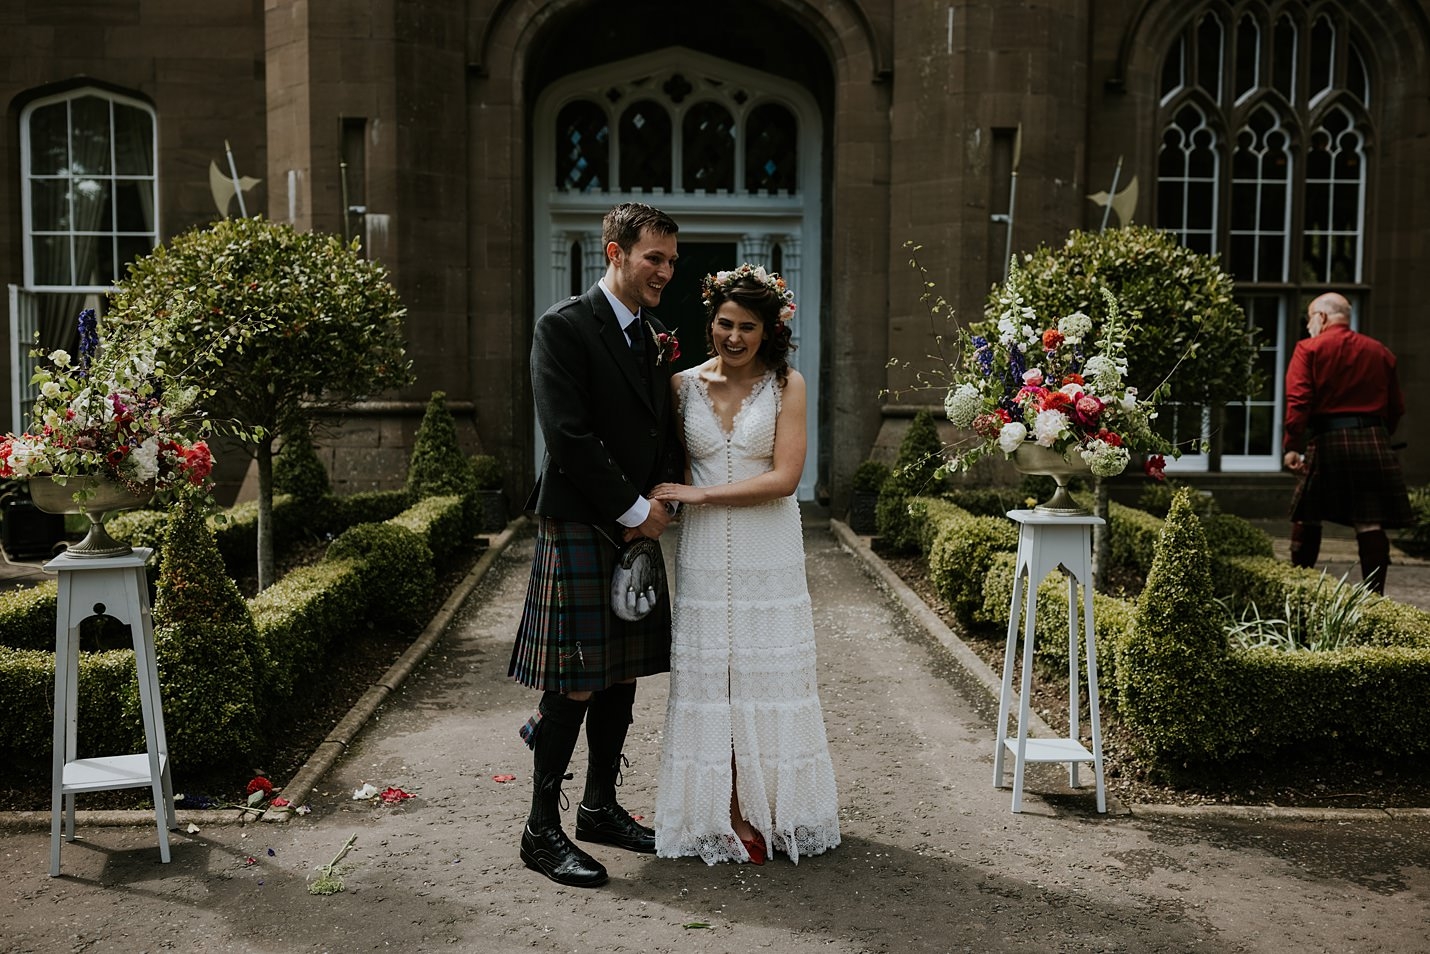 Drumtochty Castle outdoor wedding ceremony bride groom the flower pavilion bridal crown & colourful floral display chiffon and lace Catherine Deane bridal gown